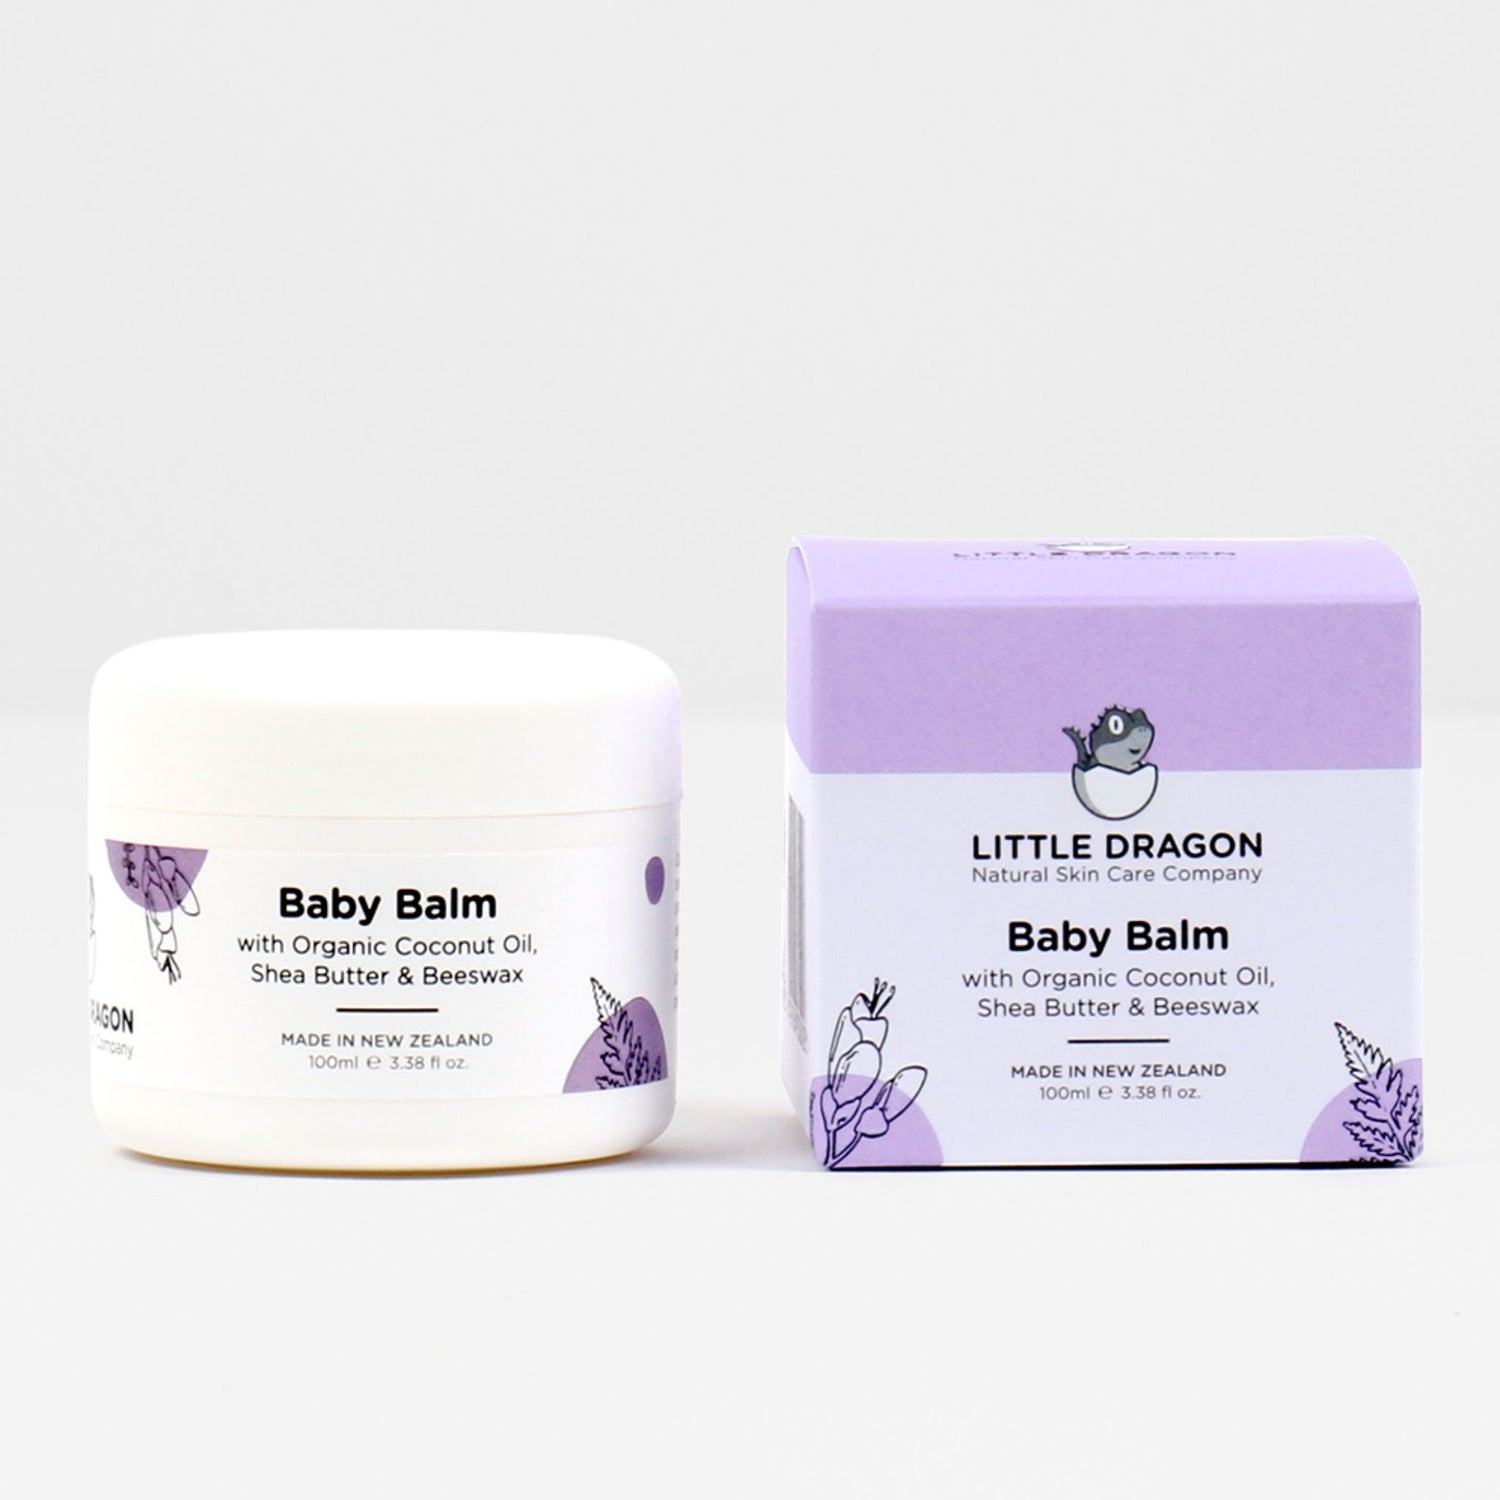 Little Dragon Baby Balm with Coconut Oil, Shea butter & Beeswax. Nappy rash cream